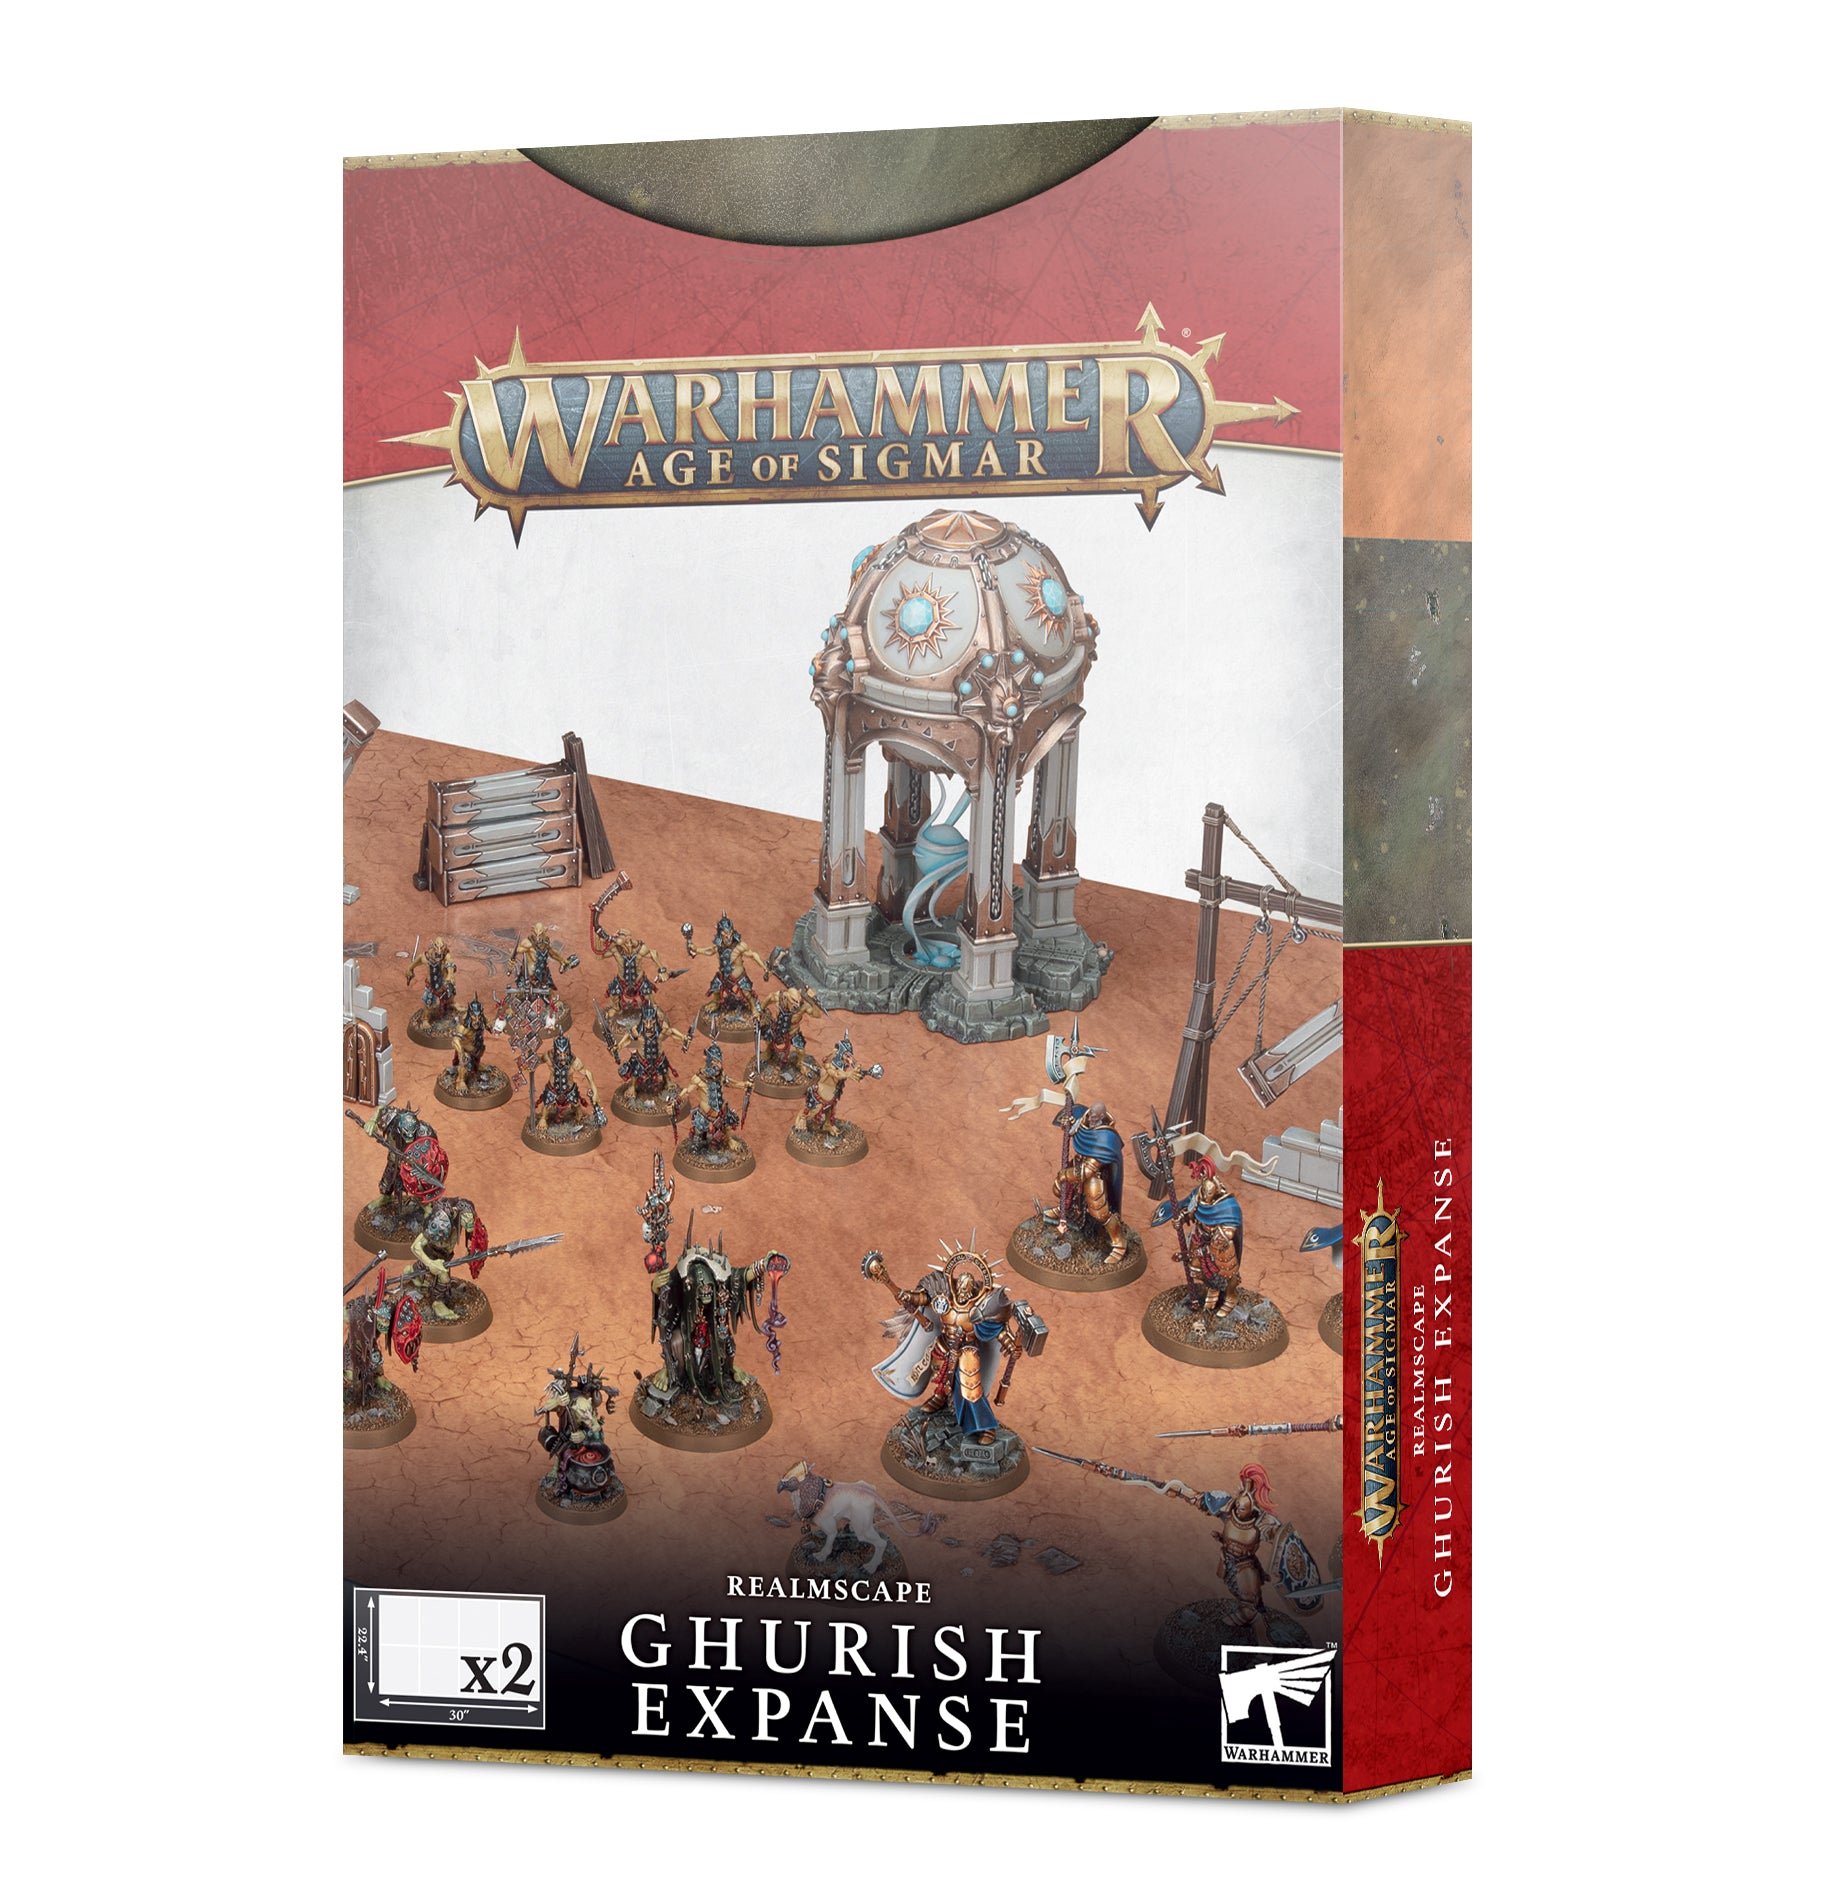 Age of Sigmar: Realmscape Ghurish Expanse